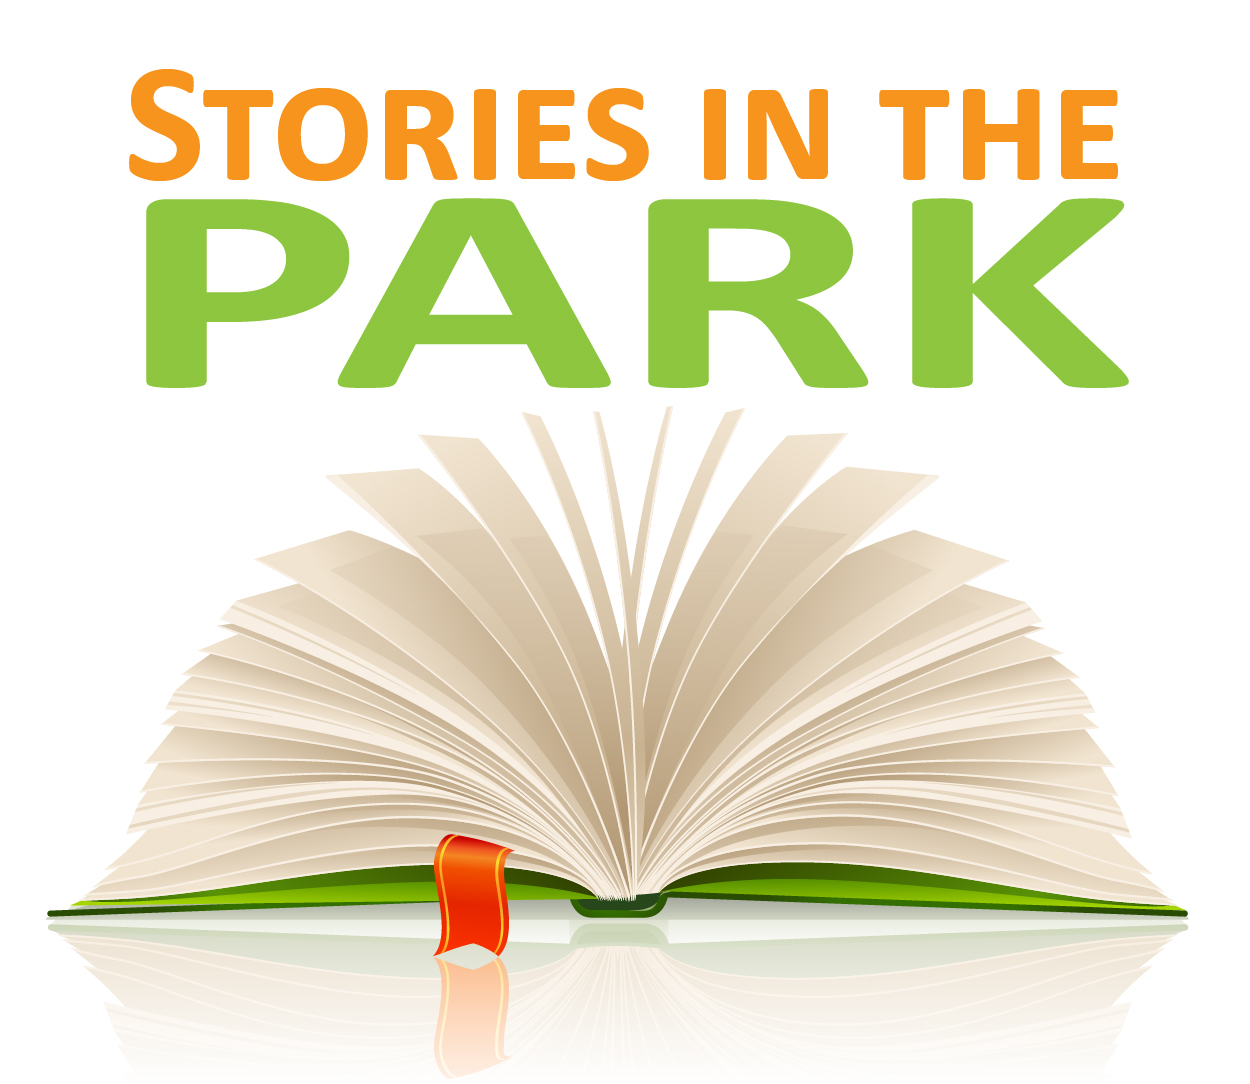 Stories in the Park